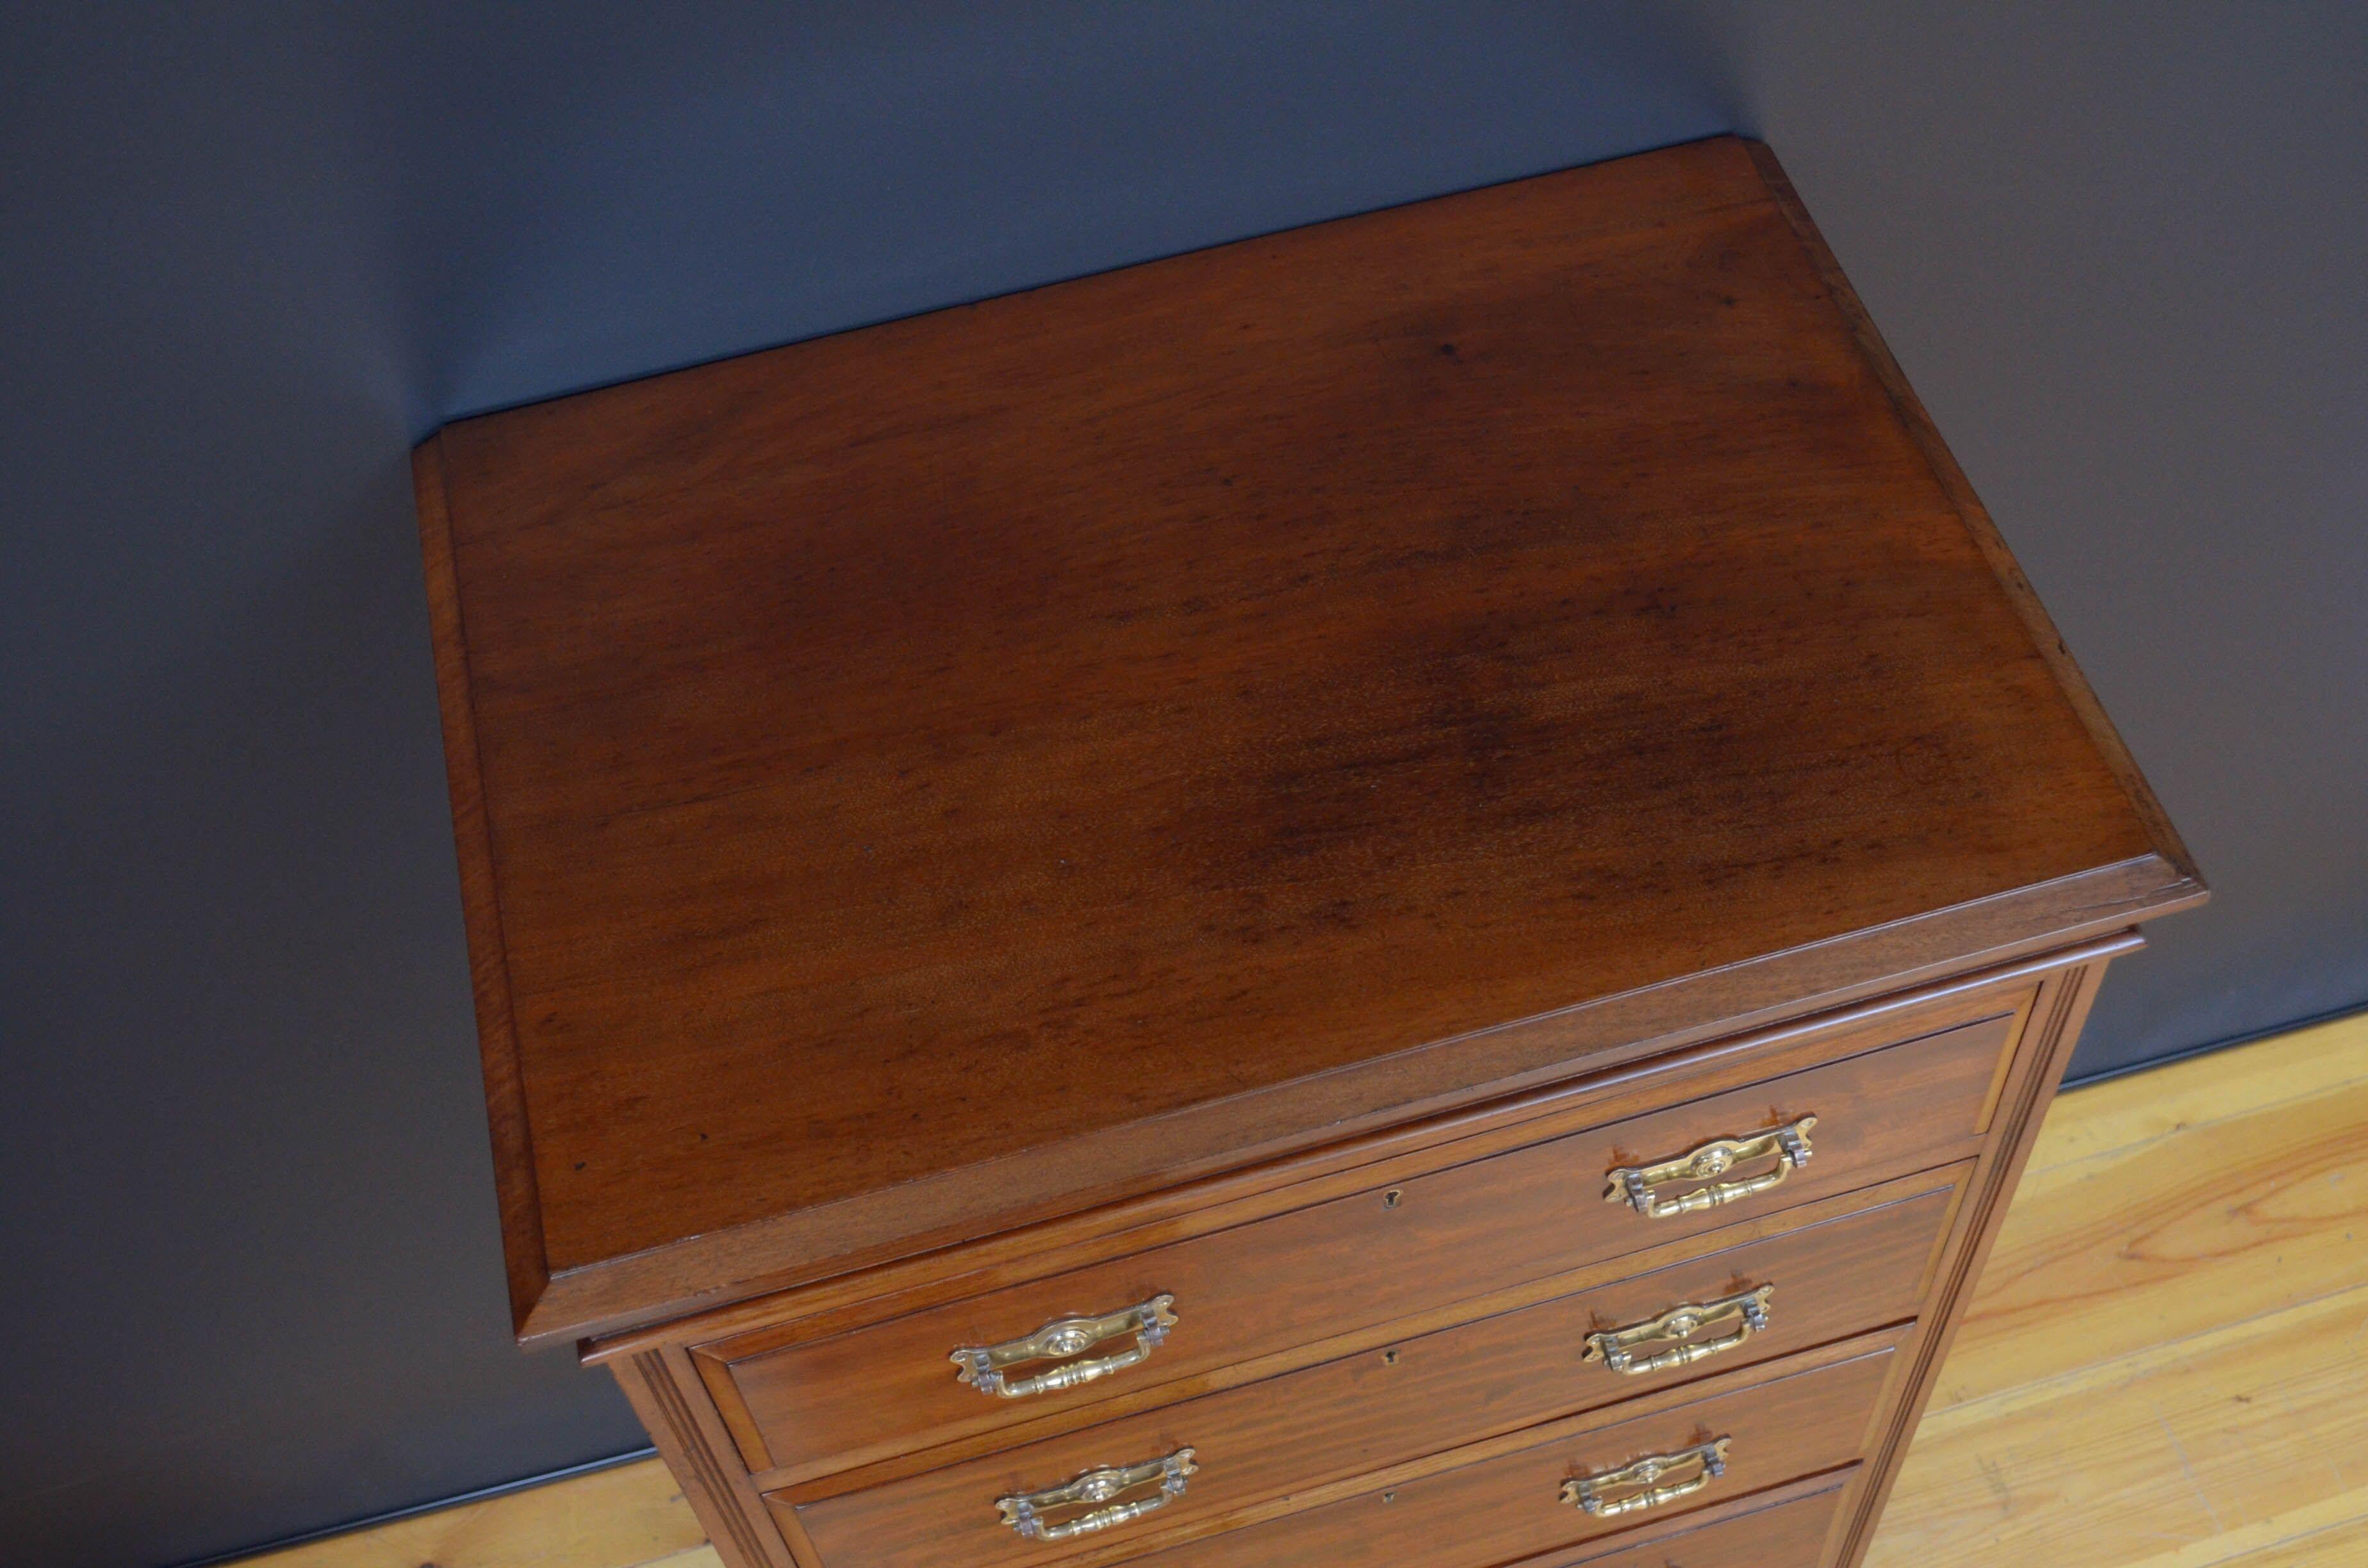 Sn5220 Edwardian mahogany tall chest of drawers by Maples, having figured top with moulded edge above five, mahogany lined, fielded and graduated drawers, all fitted with original brass handles and flanked by reeded pilasters, all standing on